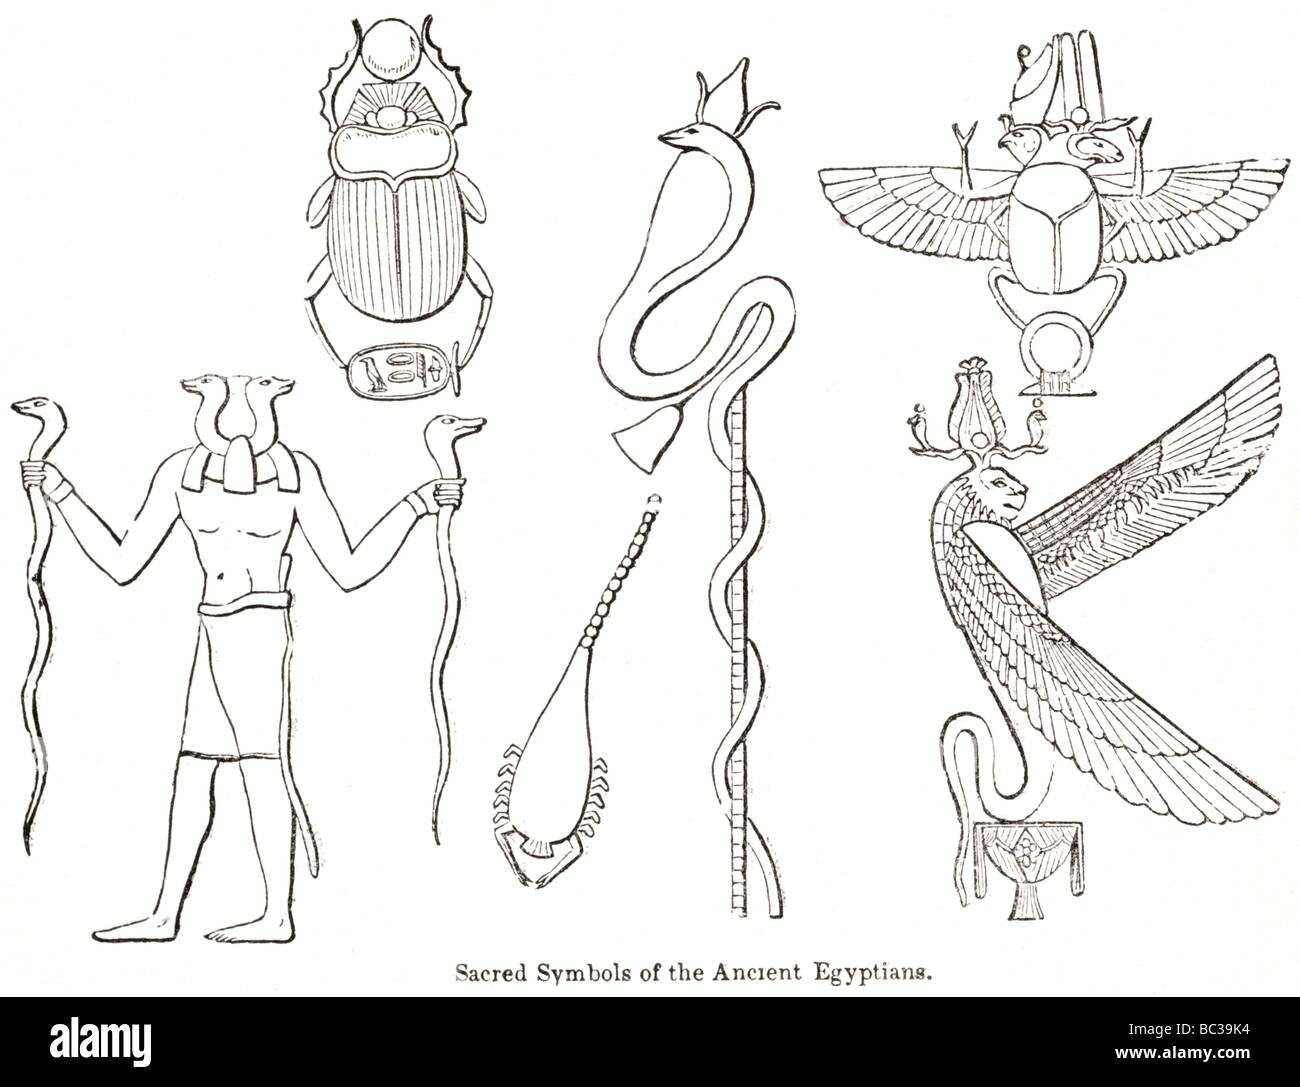 sacred symbols of the ancient egyptians Stock Photo